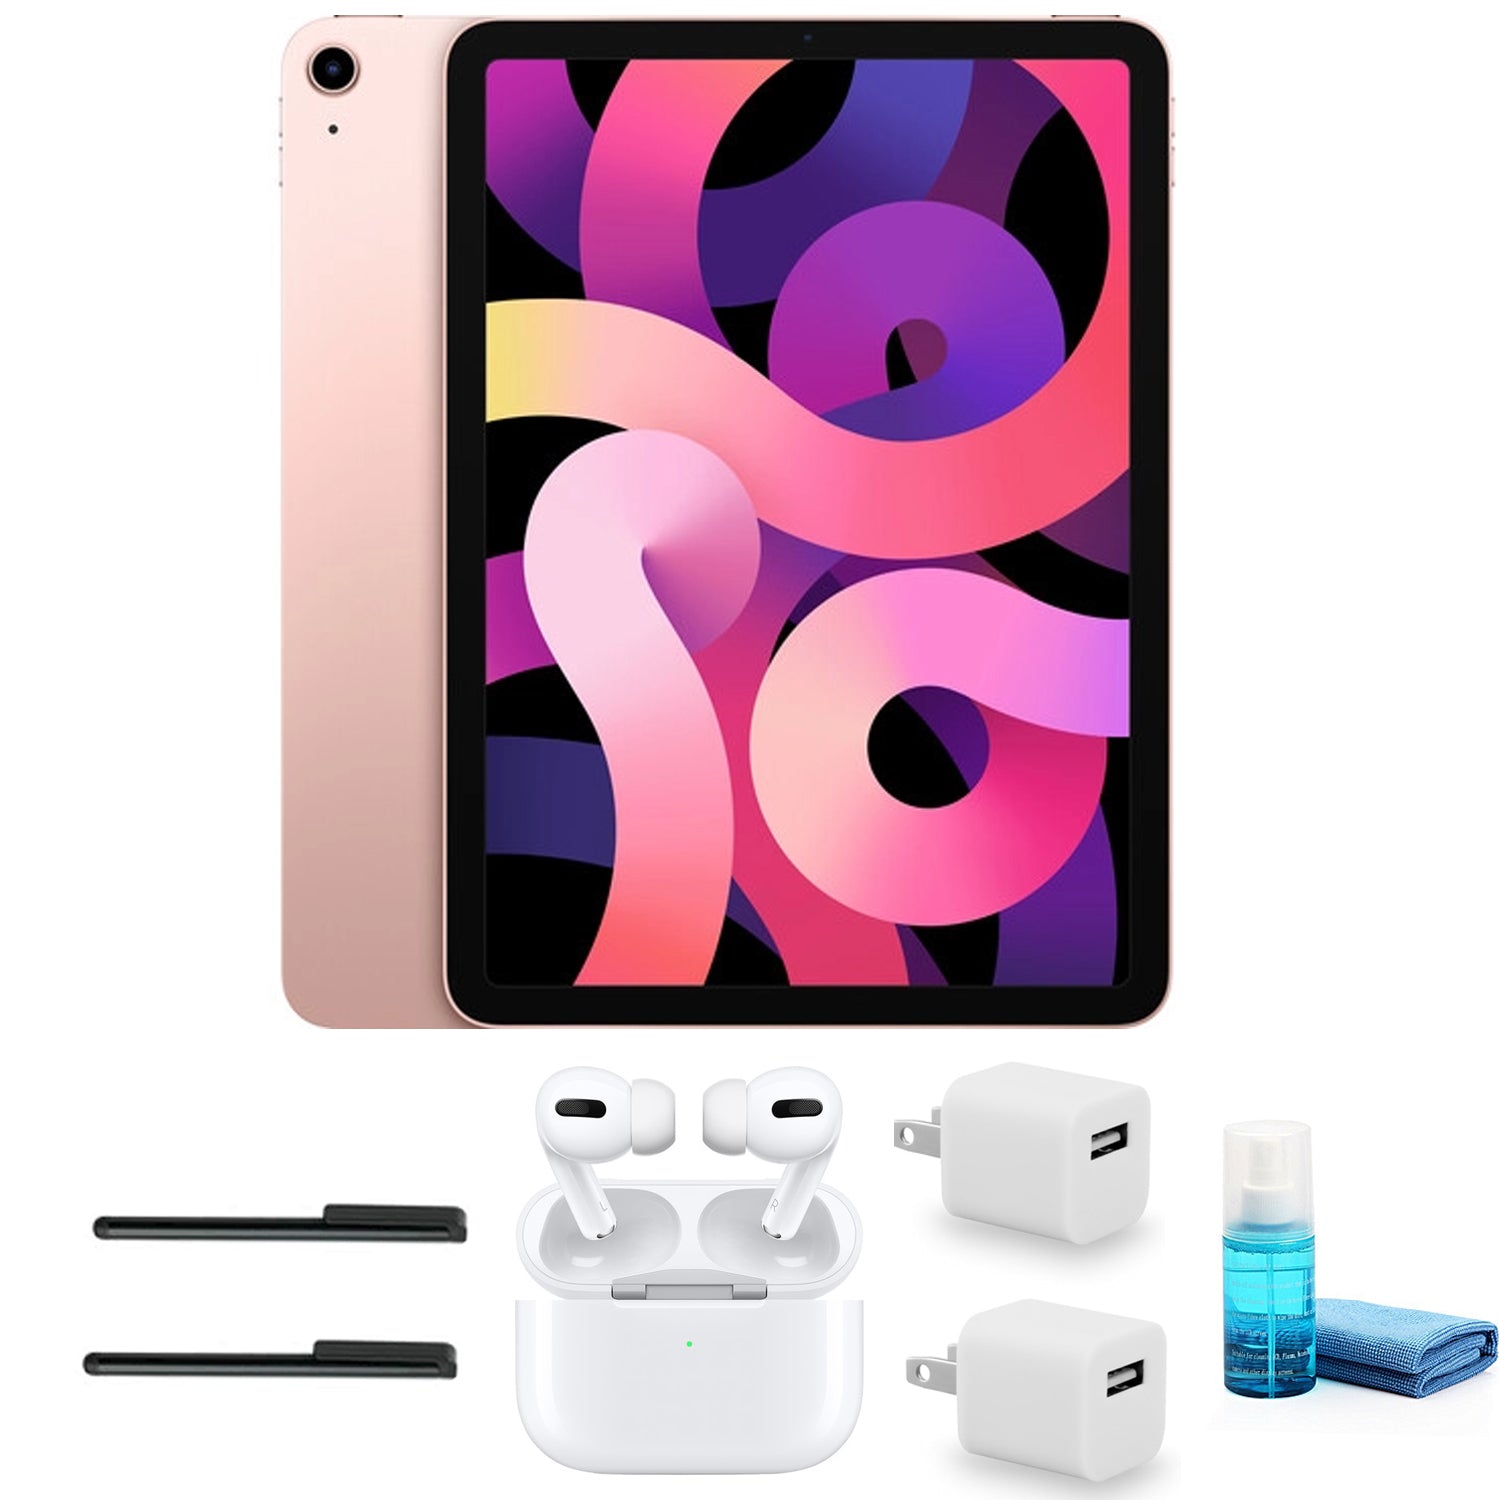 Apple 10.9 Inch iPad Air (64GB, Wi-Fi, Rose Gold) with AirPods Pro + More